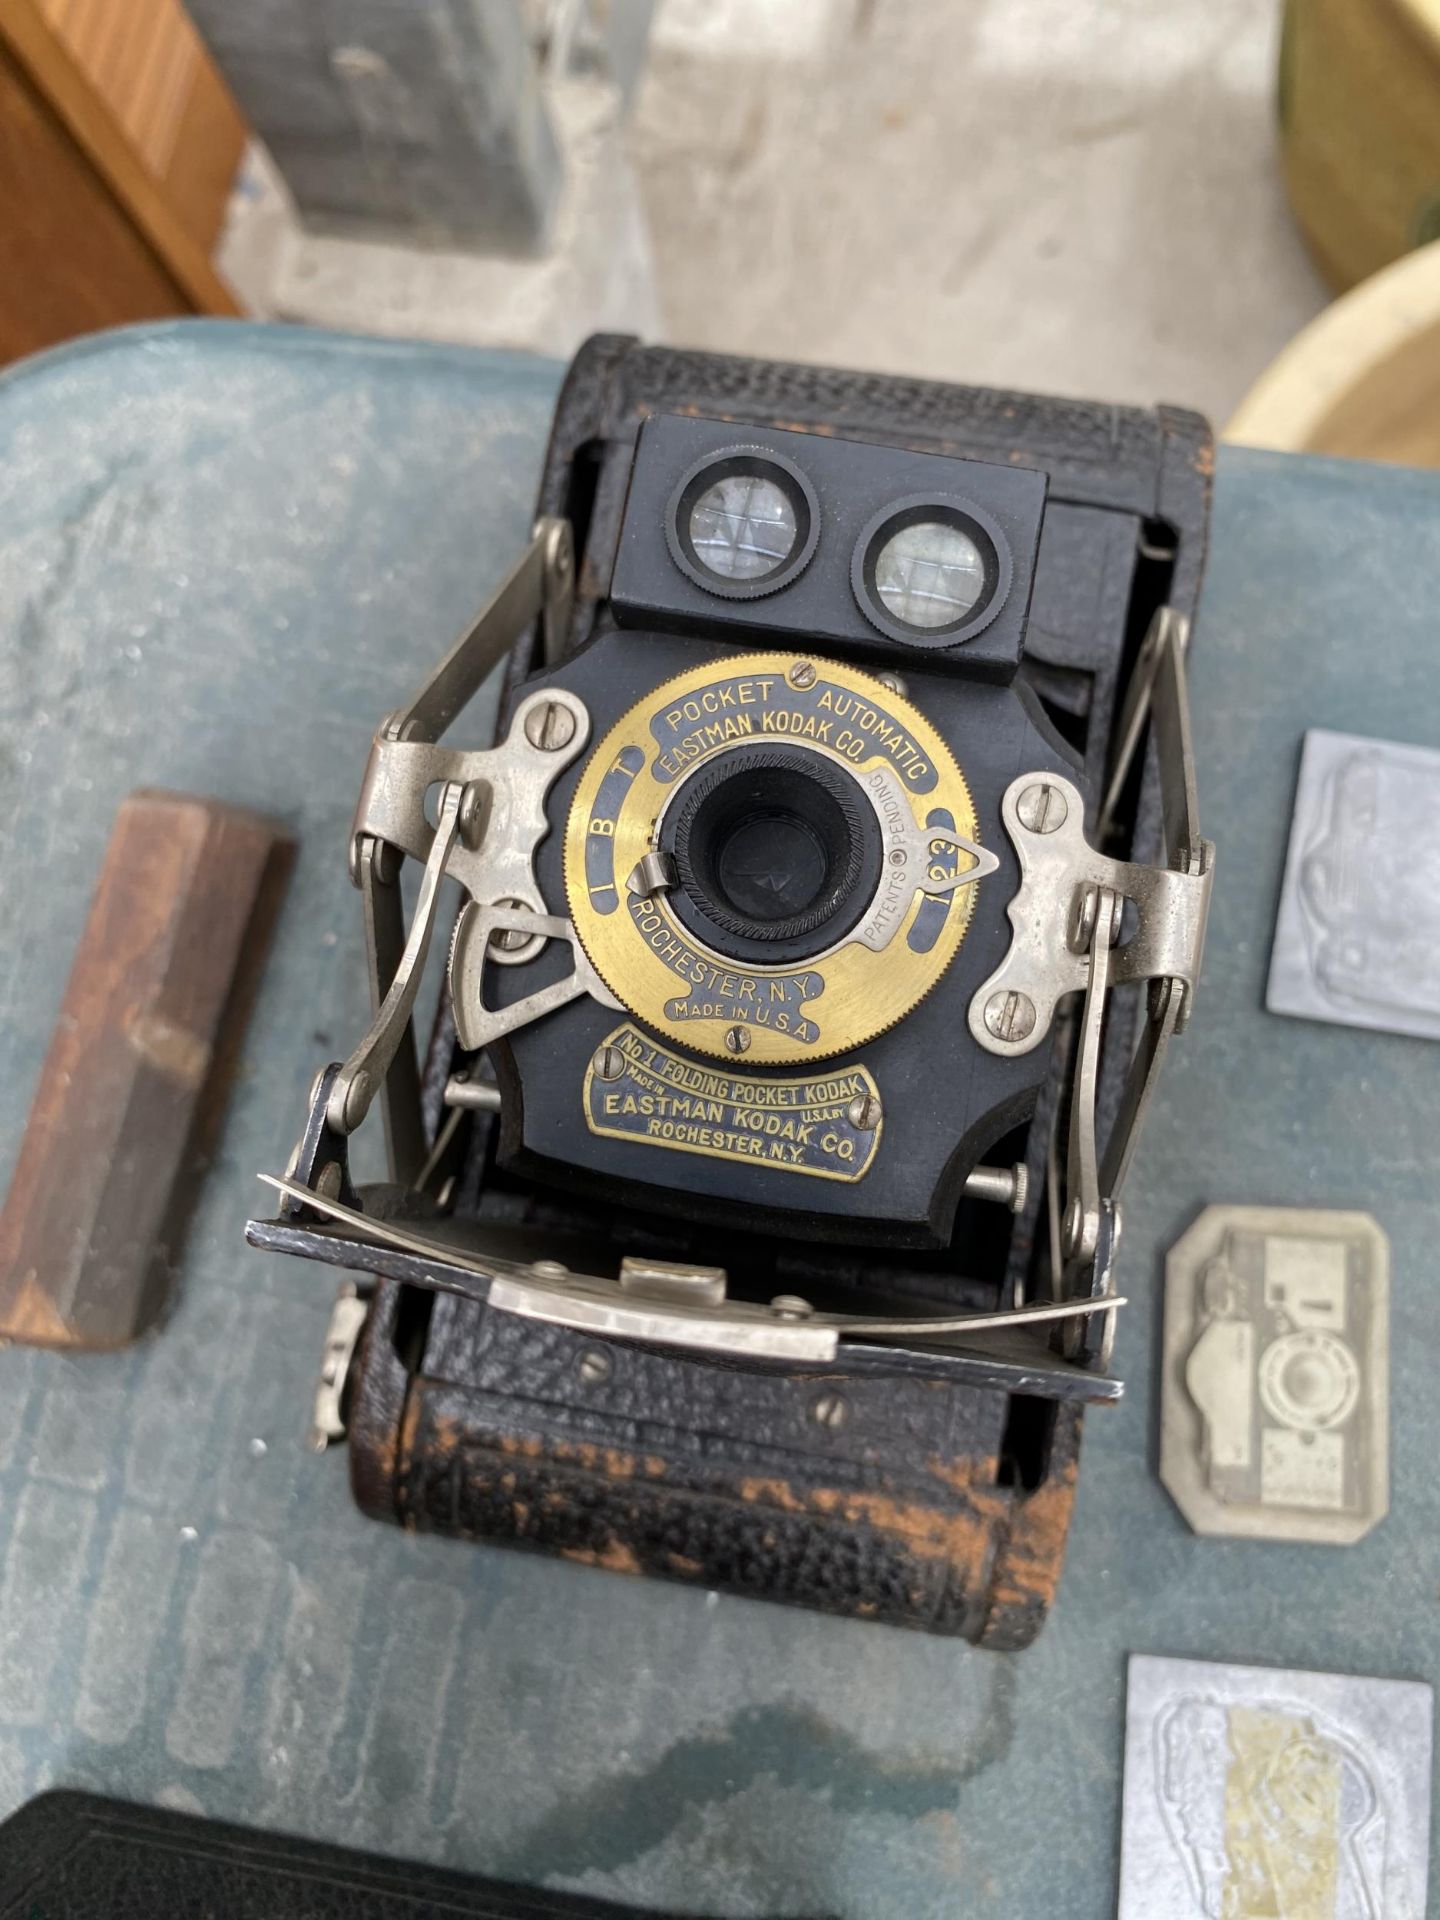 A KODAK EASTMANN AUTOMATIC CAMERA, FURTHER CAMERA AND METAL CAMERA PLAQUES - Image 2 of 4